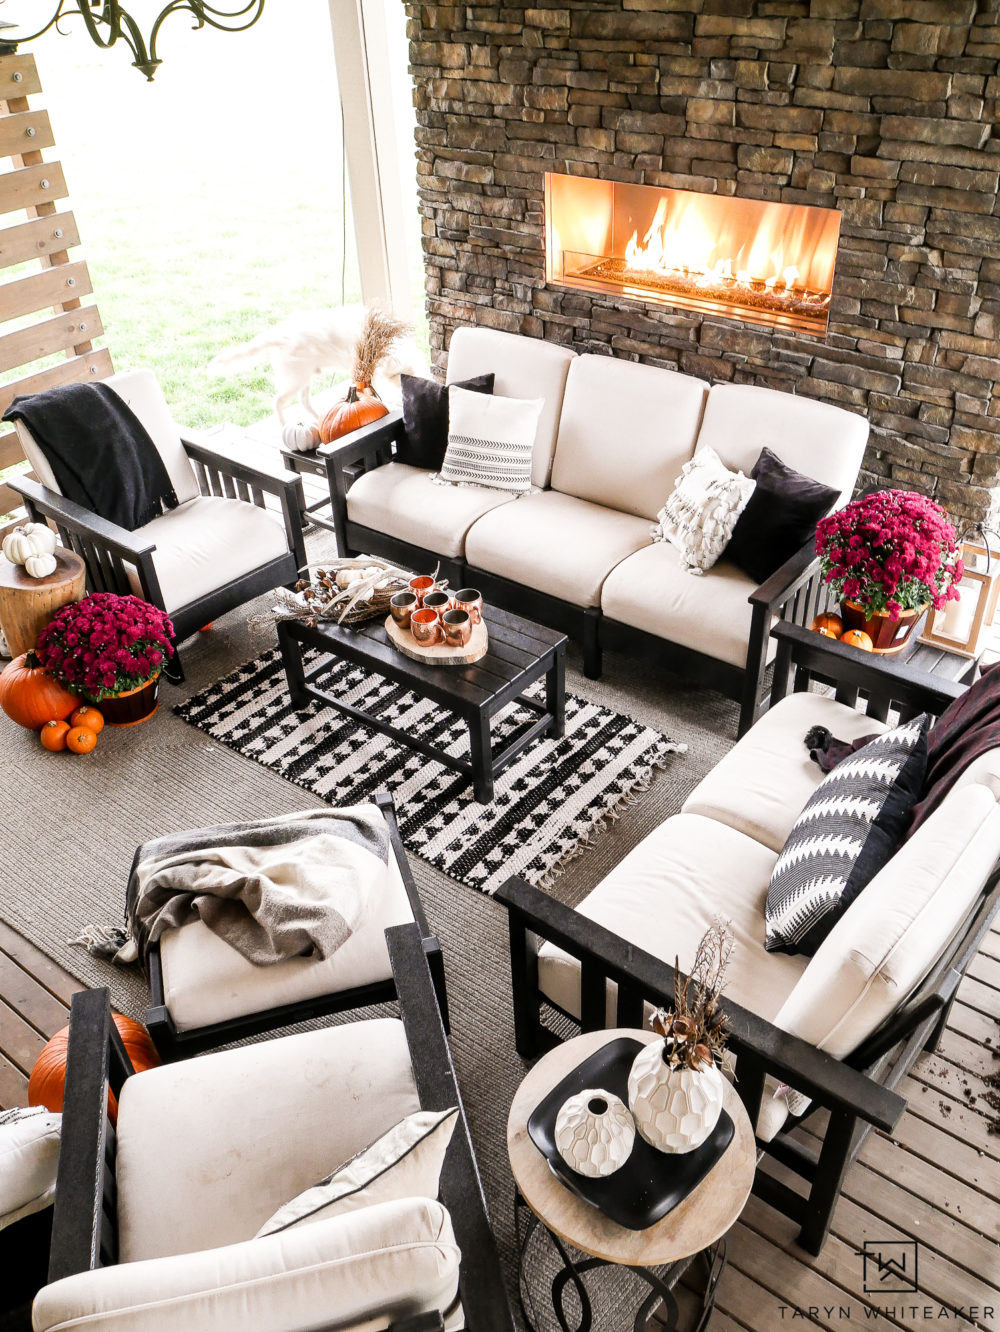 Tips For Decorating Your Outdoor Space For Fall